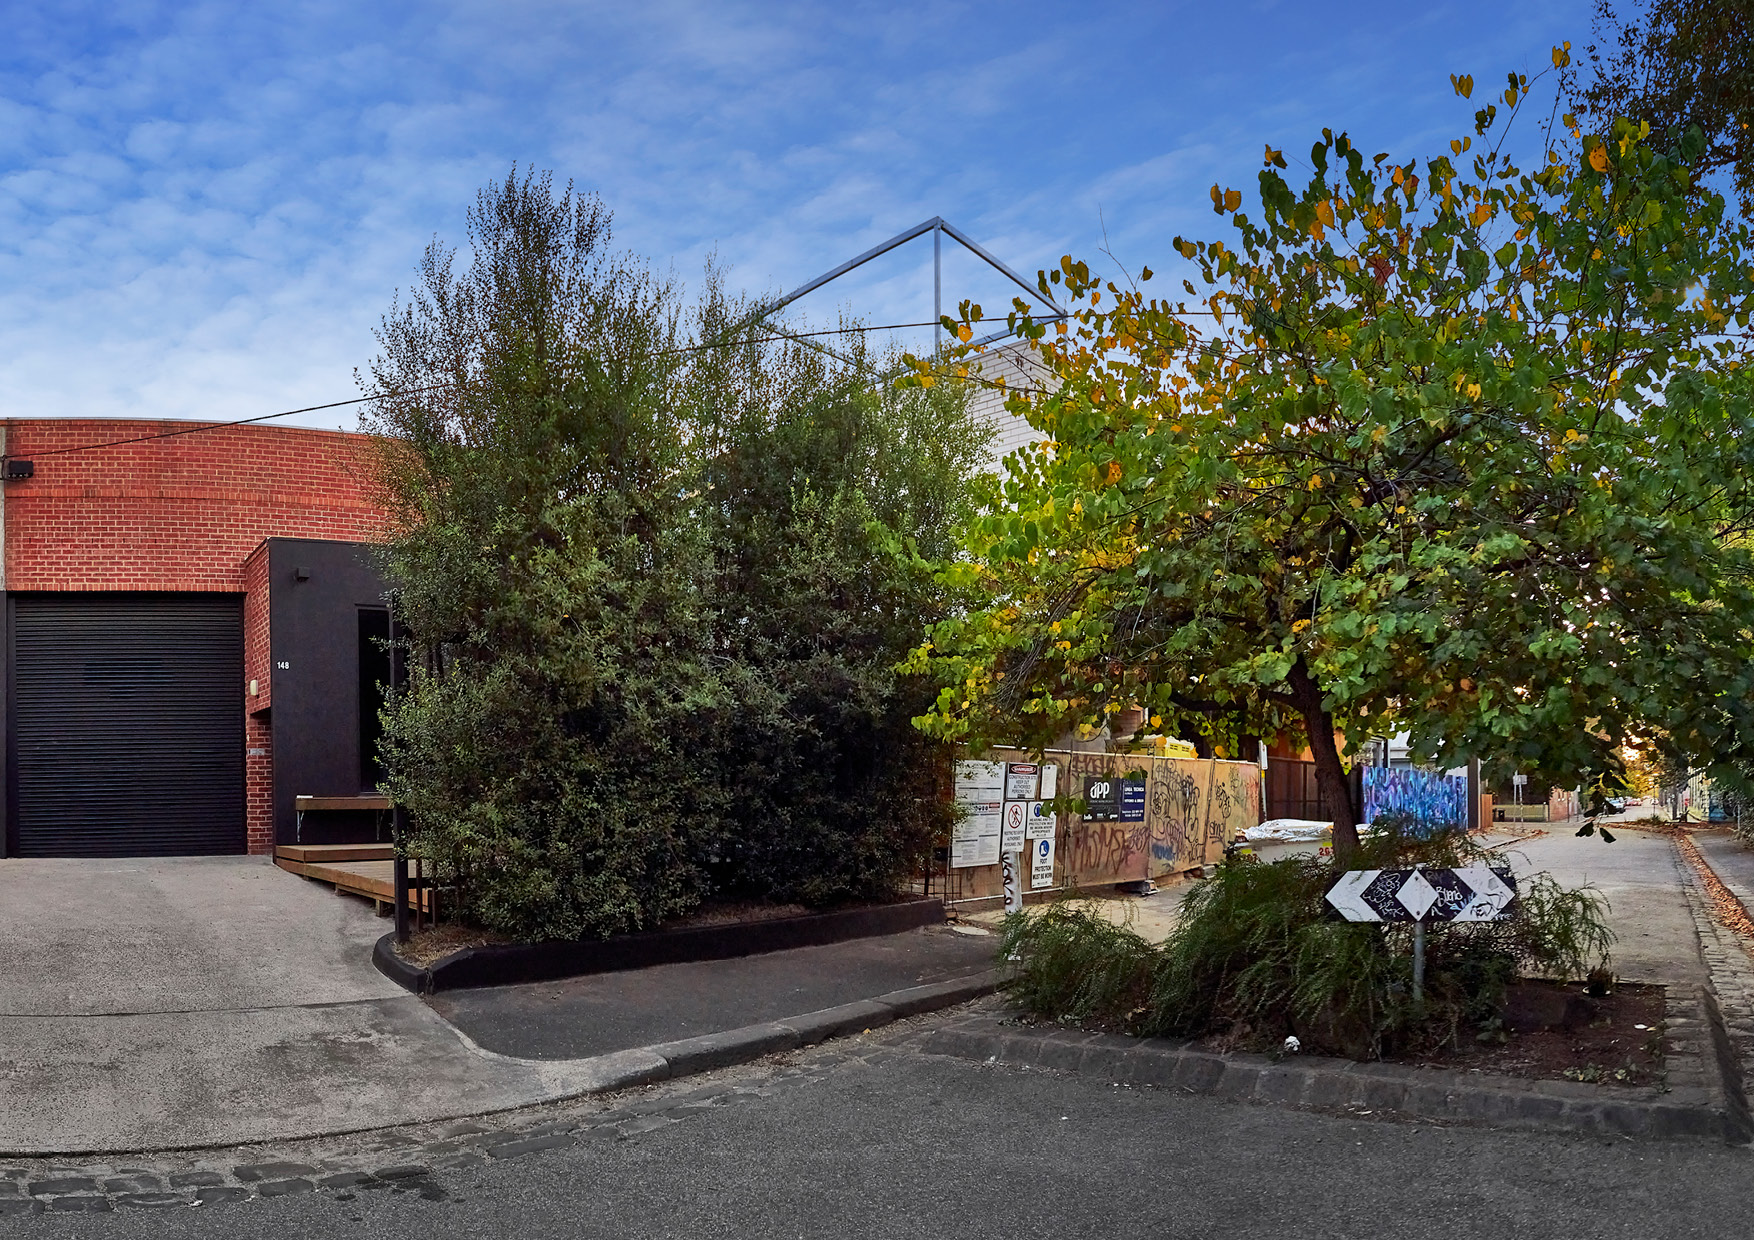 Sale 148 Cecil Street Fitzroy Warehouse Commercial Real Estate